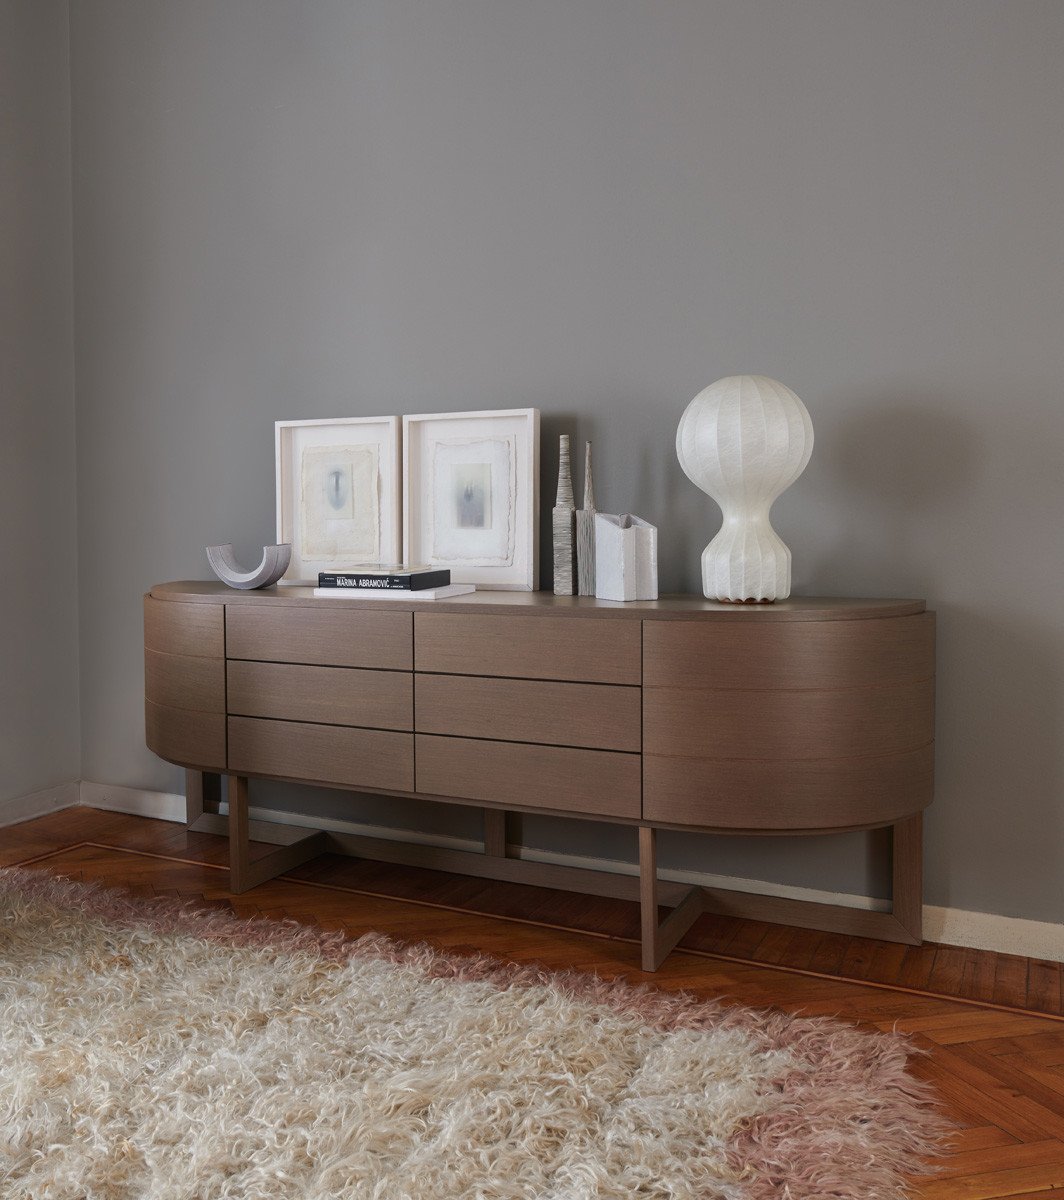 Diva Sideboard from Potocco, designed by Alexander Lorenz